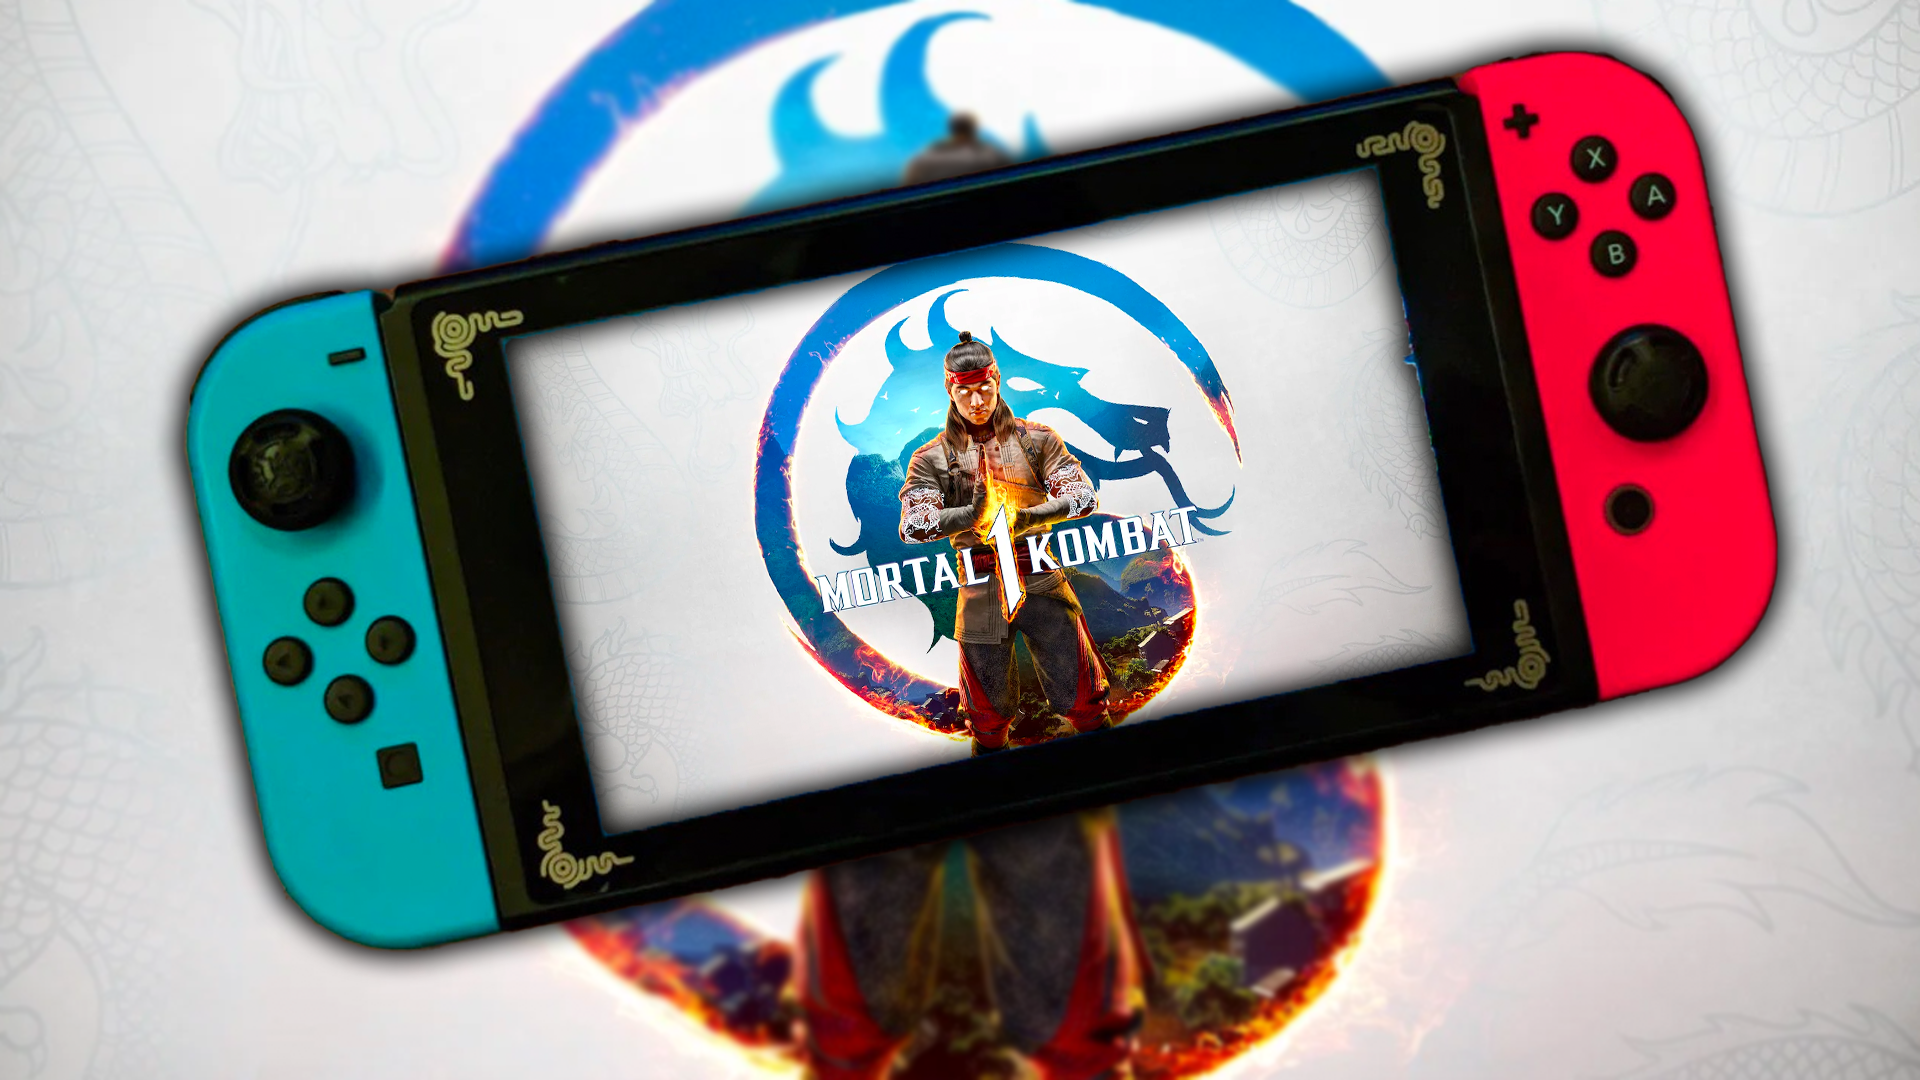 New Mortal Kombat game comes with a massive Switch price tag | Nintendo-Switch-Spiele